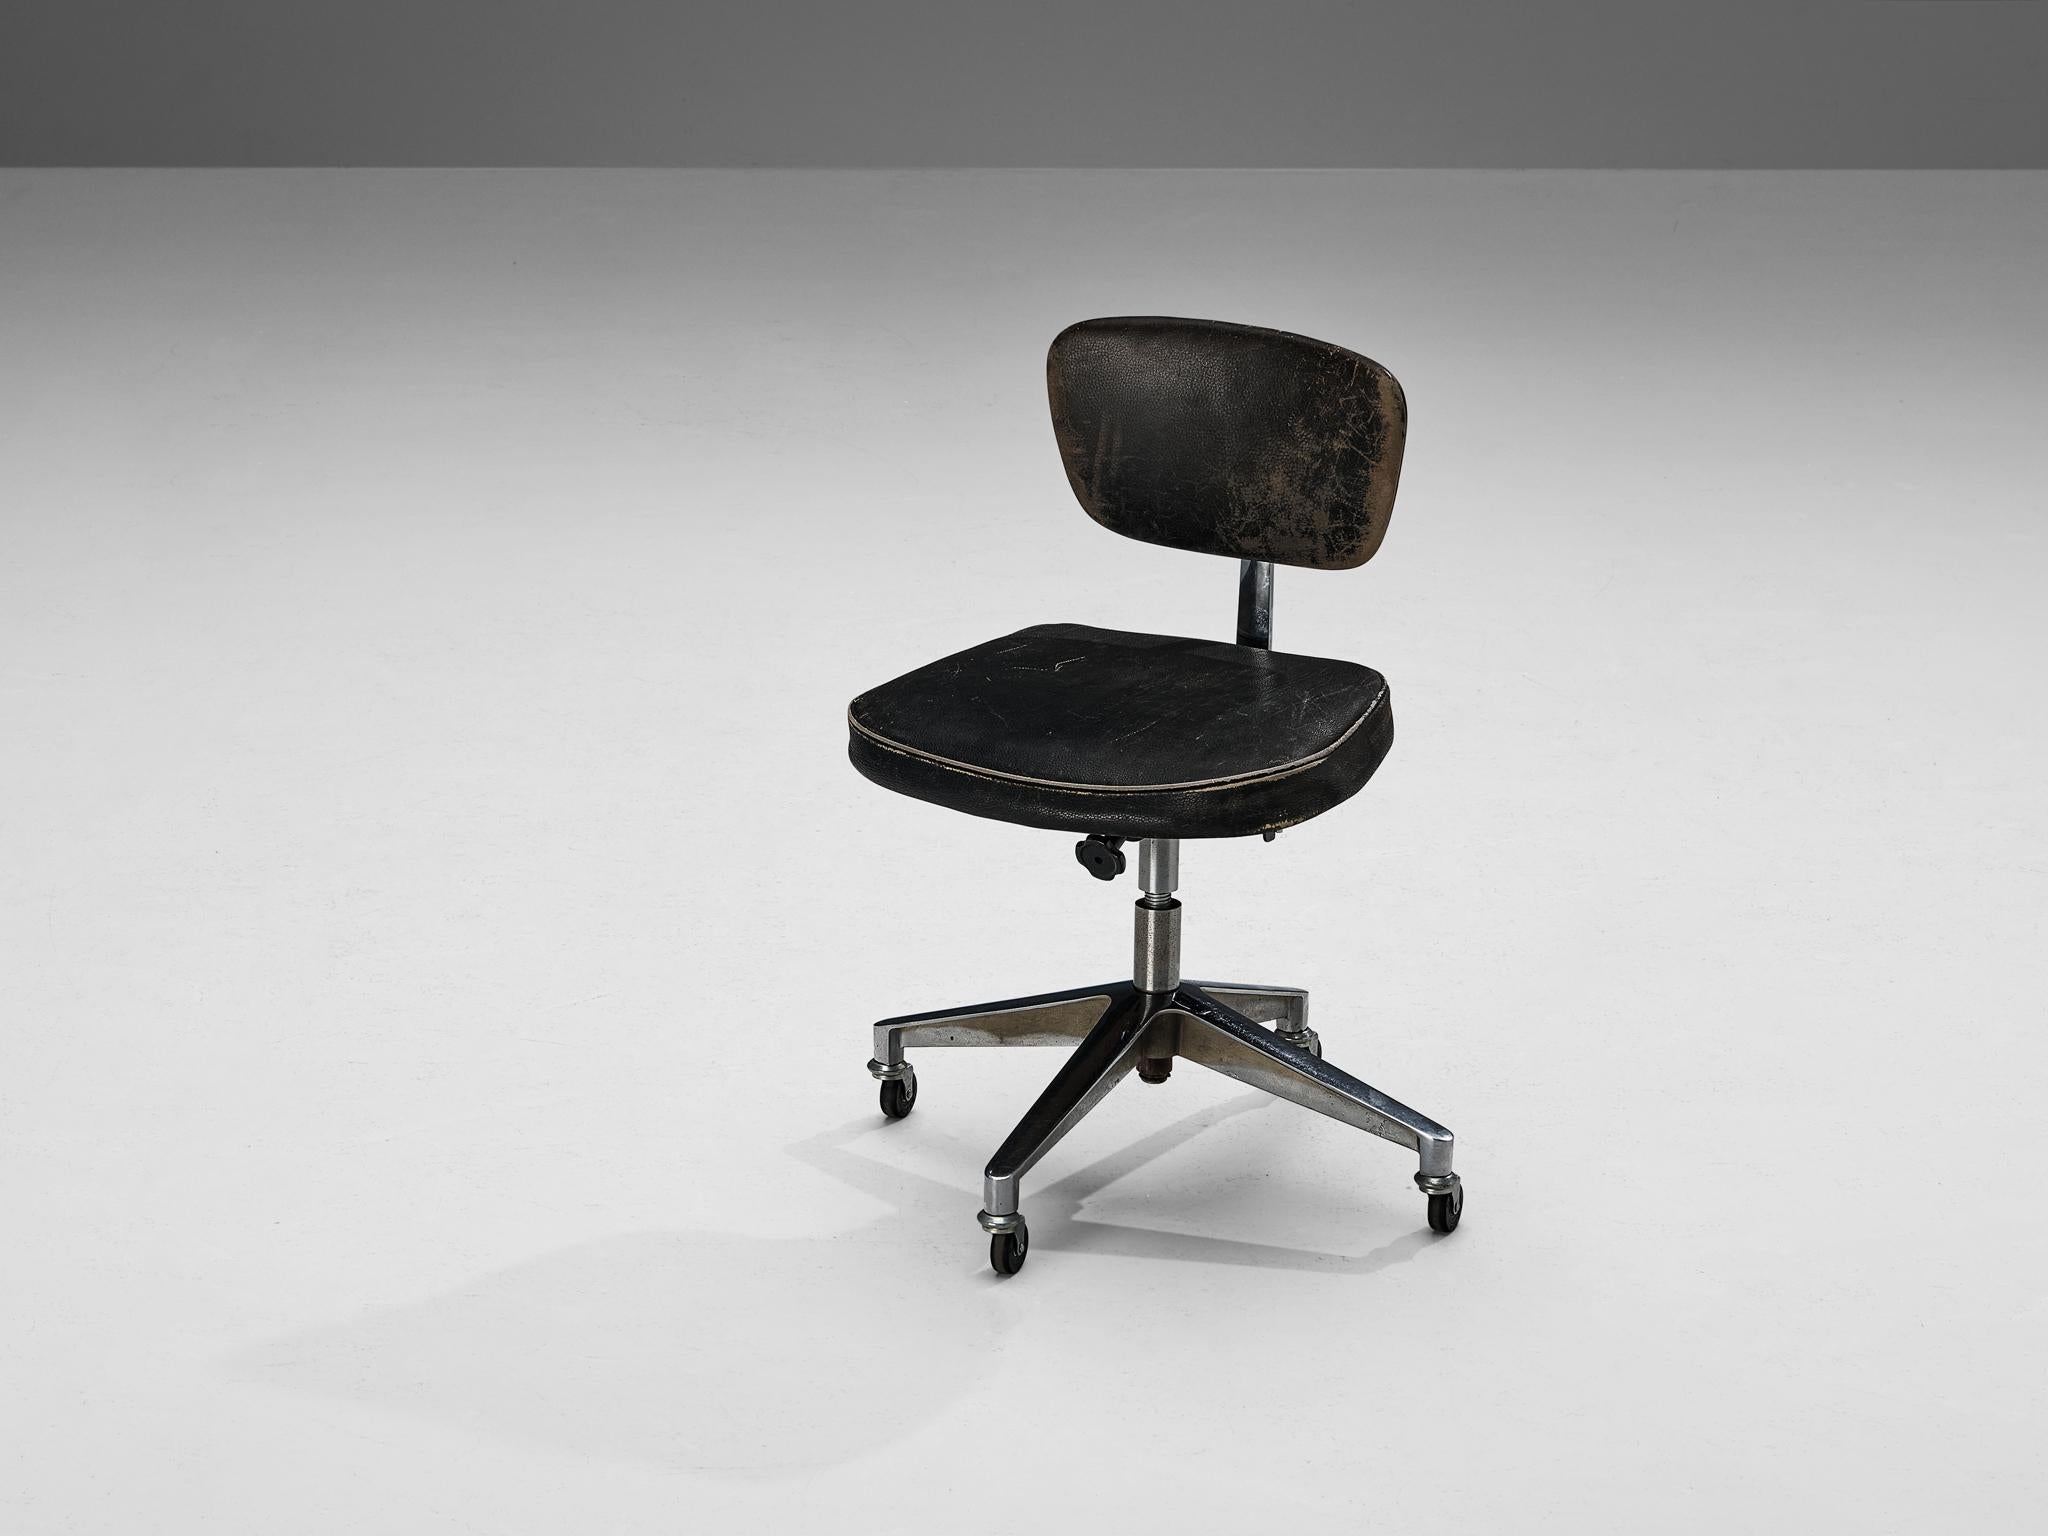 Eero Saarinen for Knoll, desk chair, model 76S, leather, metal, United States, design 1950, later production

This rare model 76S office chair by Eero Saarinen for Knoll belongs to the 70-Series seating collection developed in 1950. The